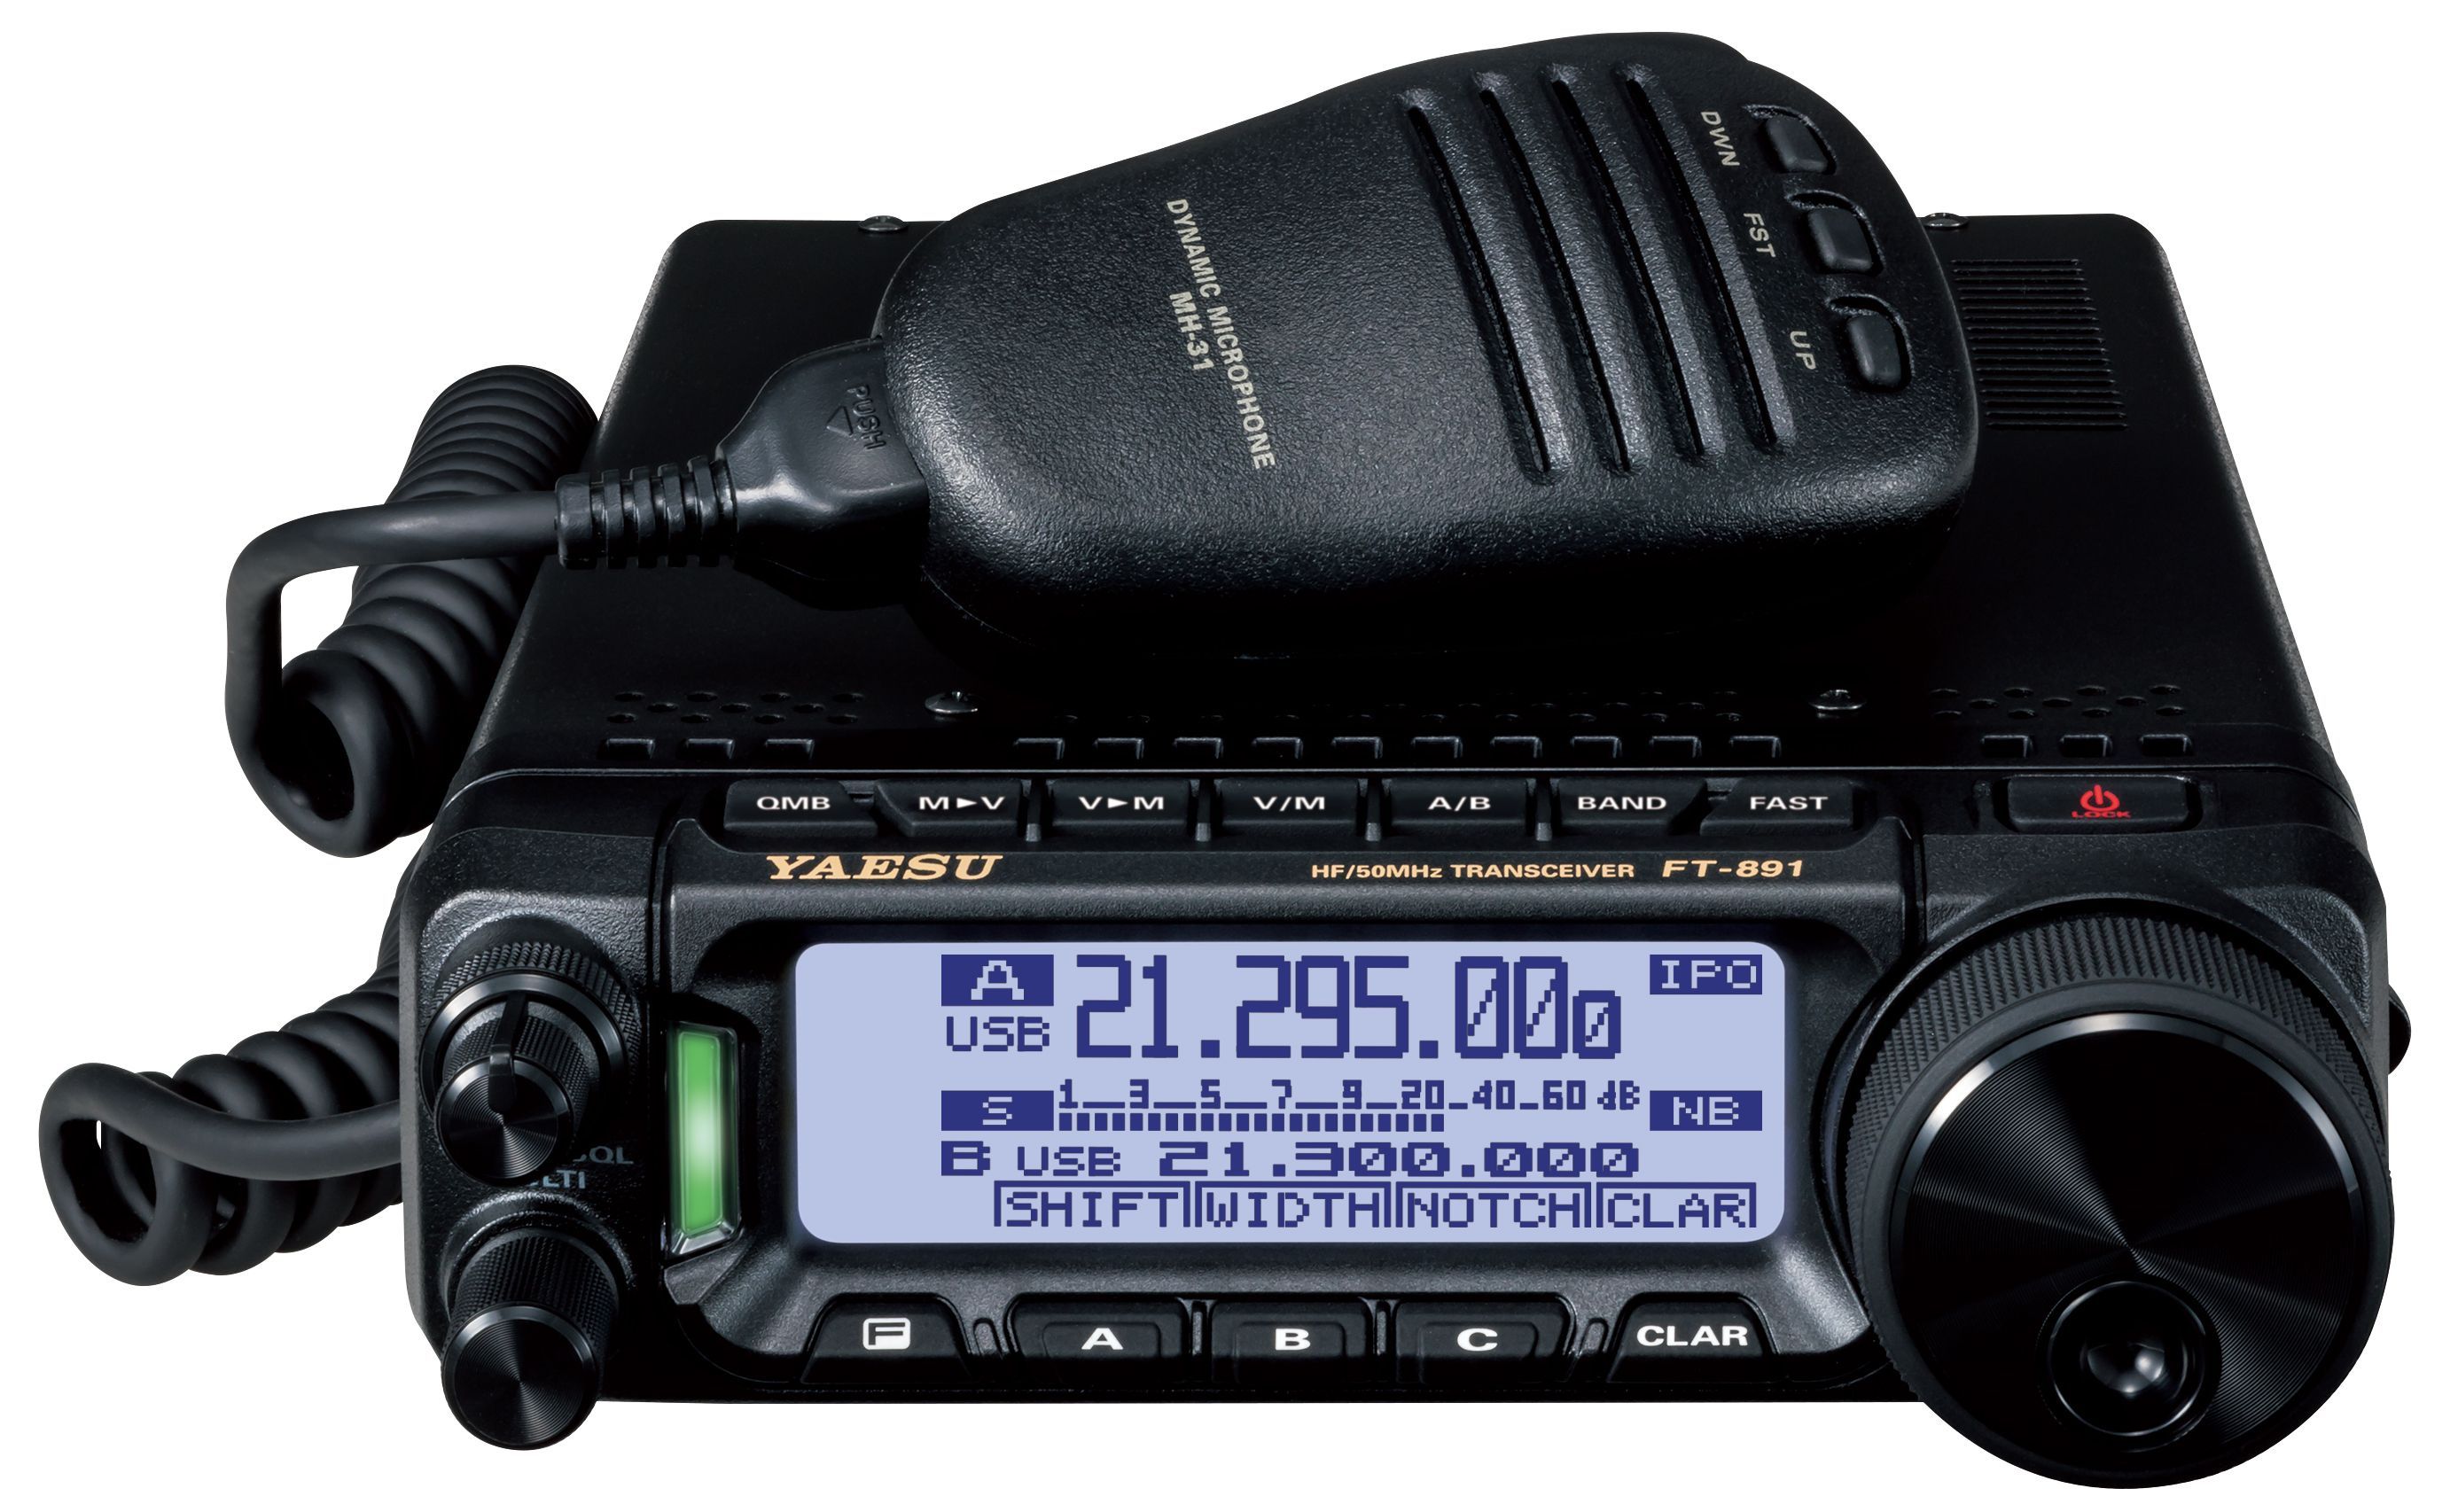 Example of a mobile transceiver